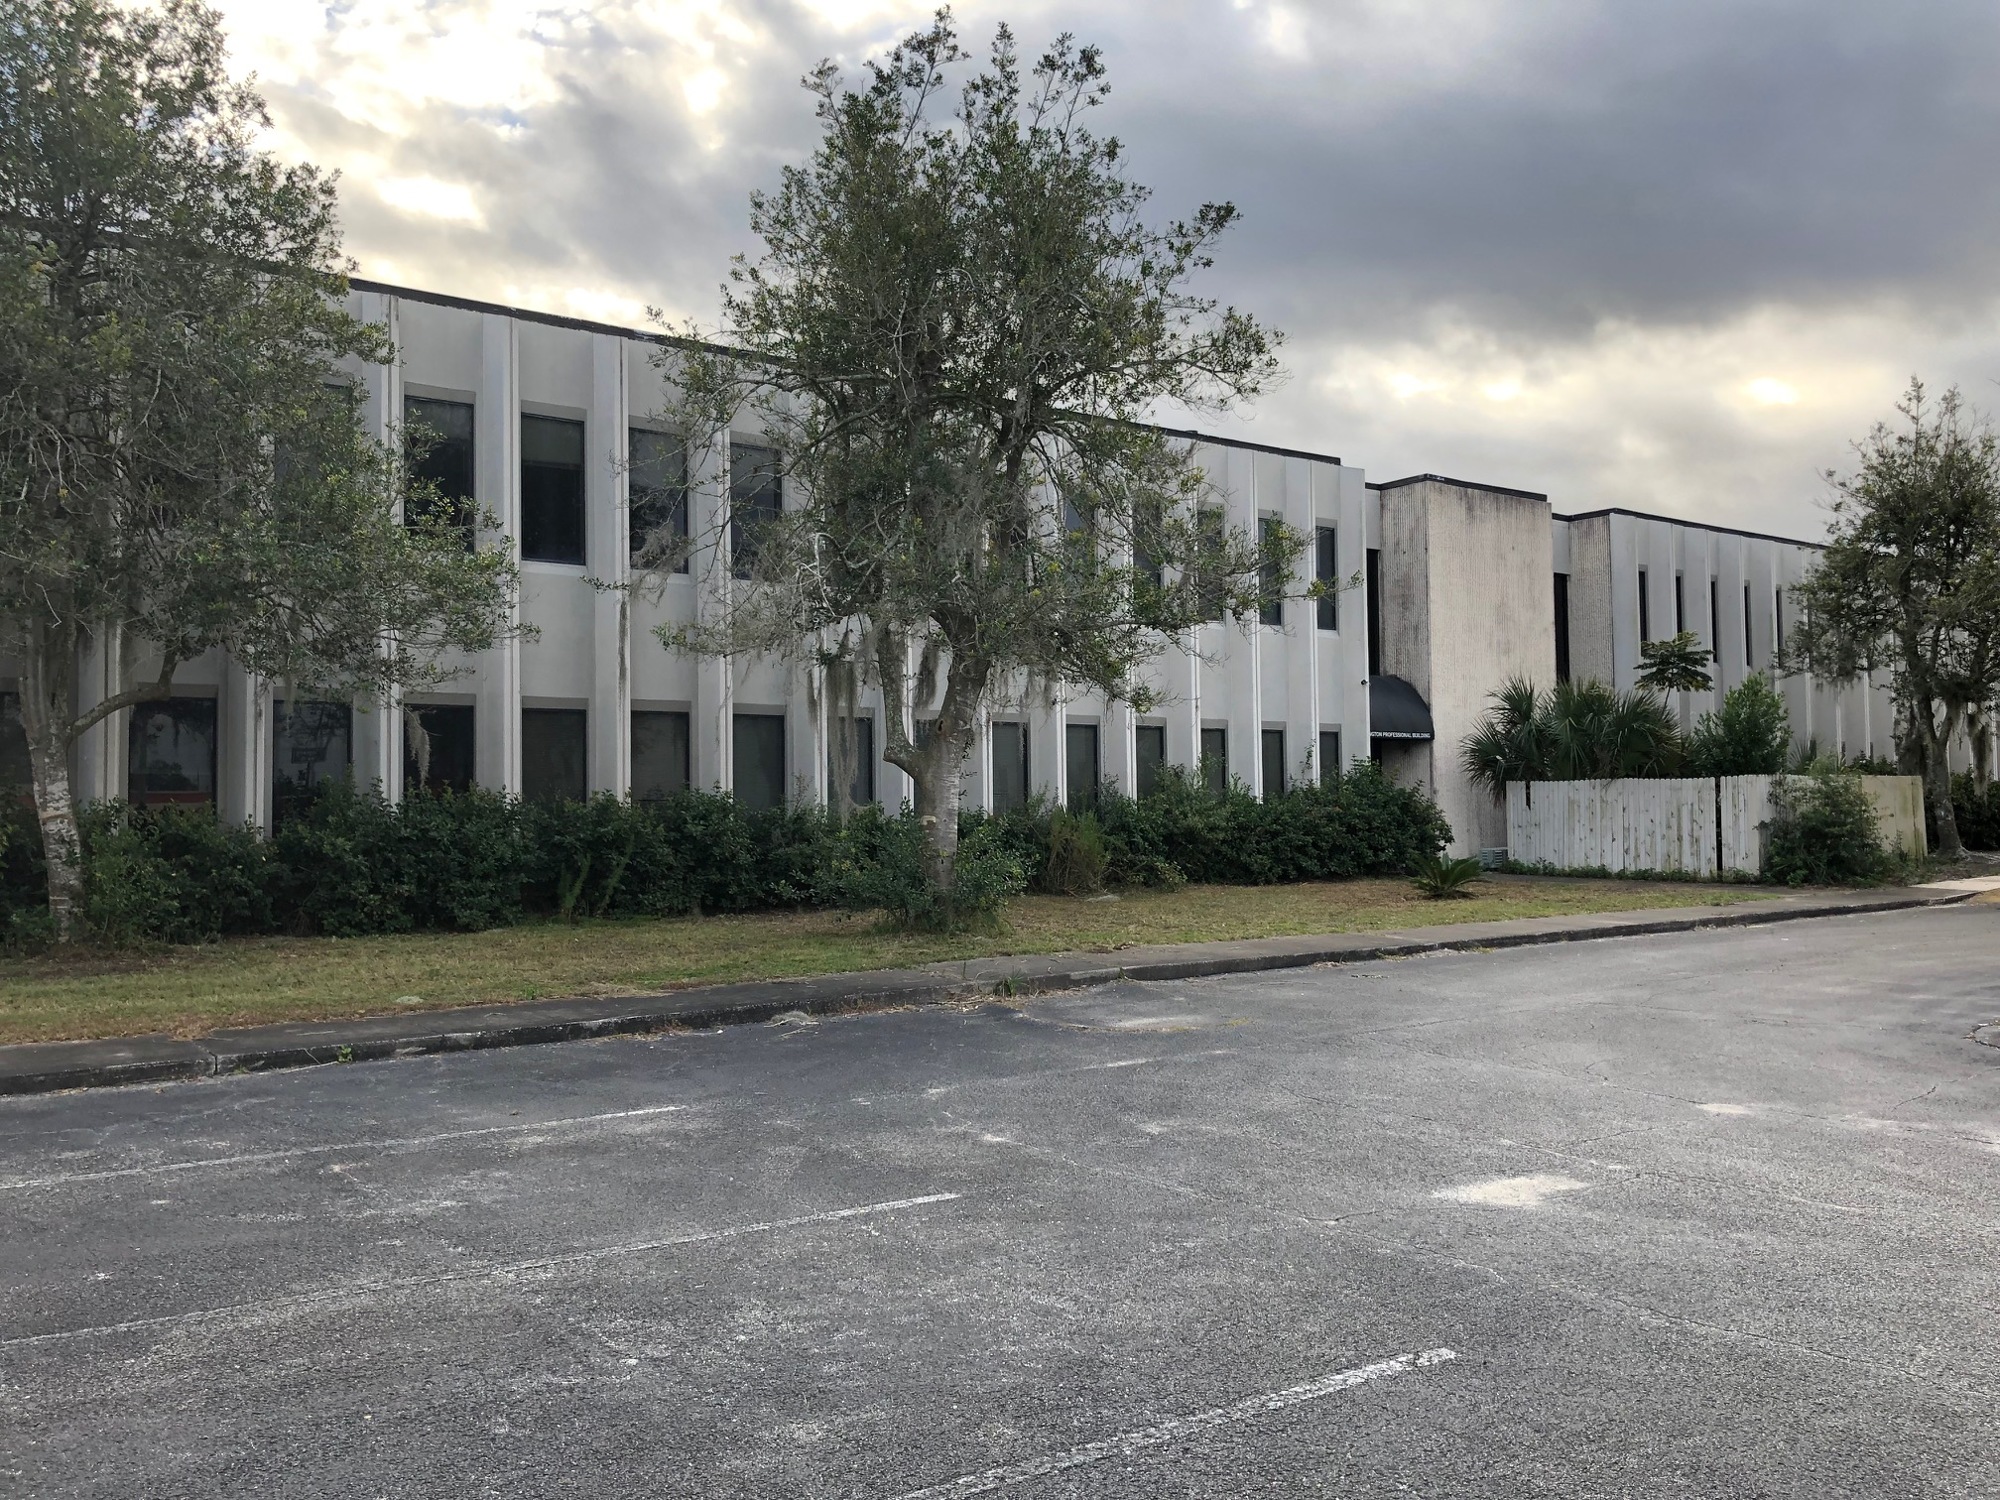 Shmuel Bonnardel’s group paid $493,900 for a two-story, almost 29,000-square-foot office building at 6501 Arlington Expressway. He said his group plans to establish a local base there.